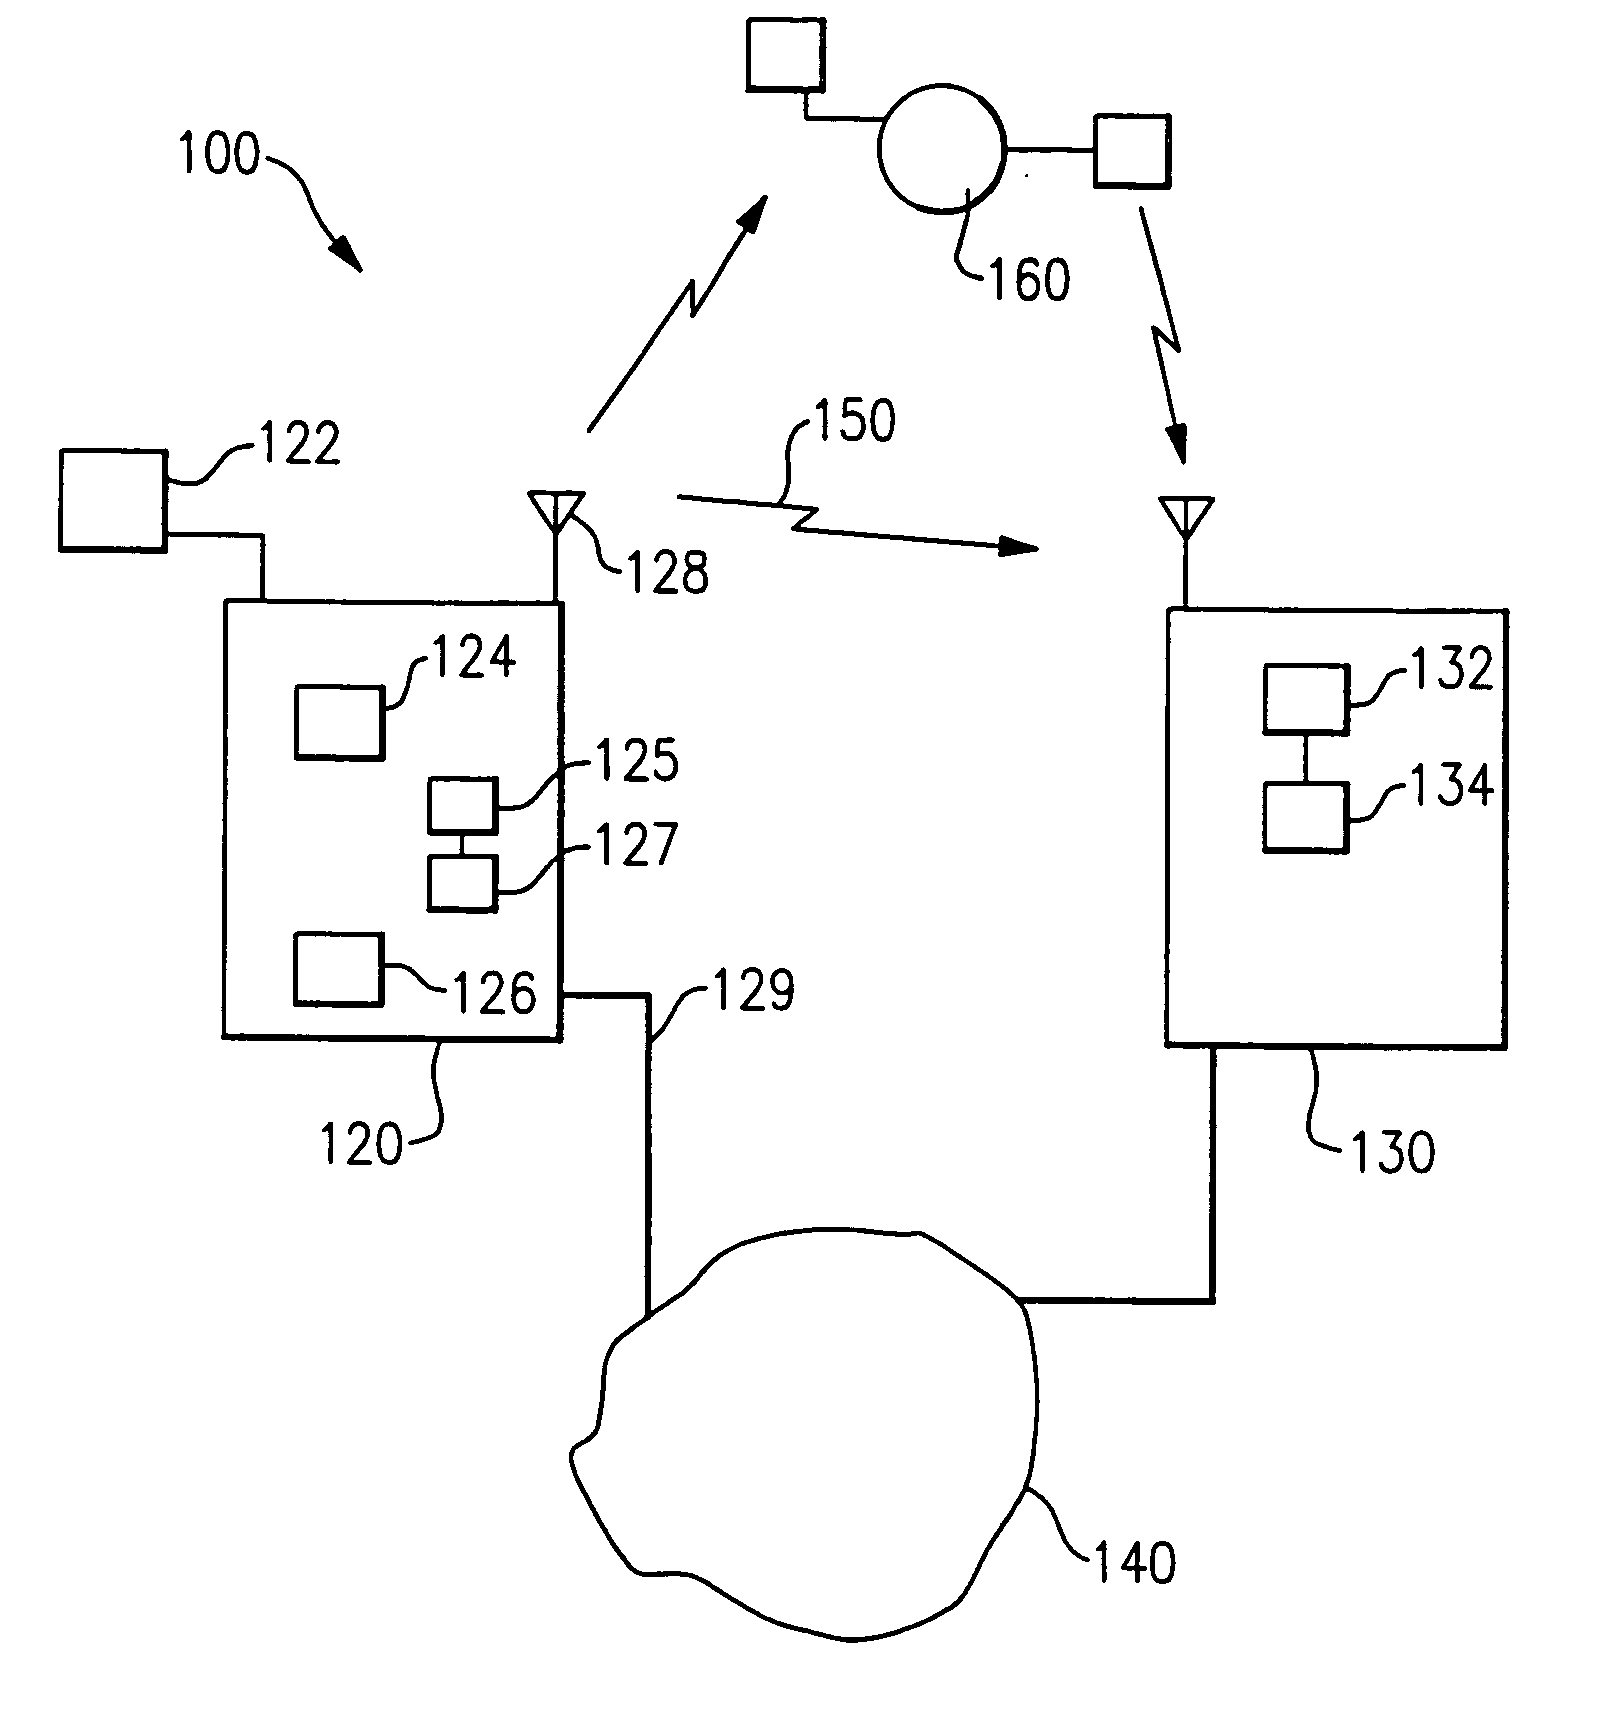 Proximity transaction apparatus and methods of use thereof